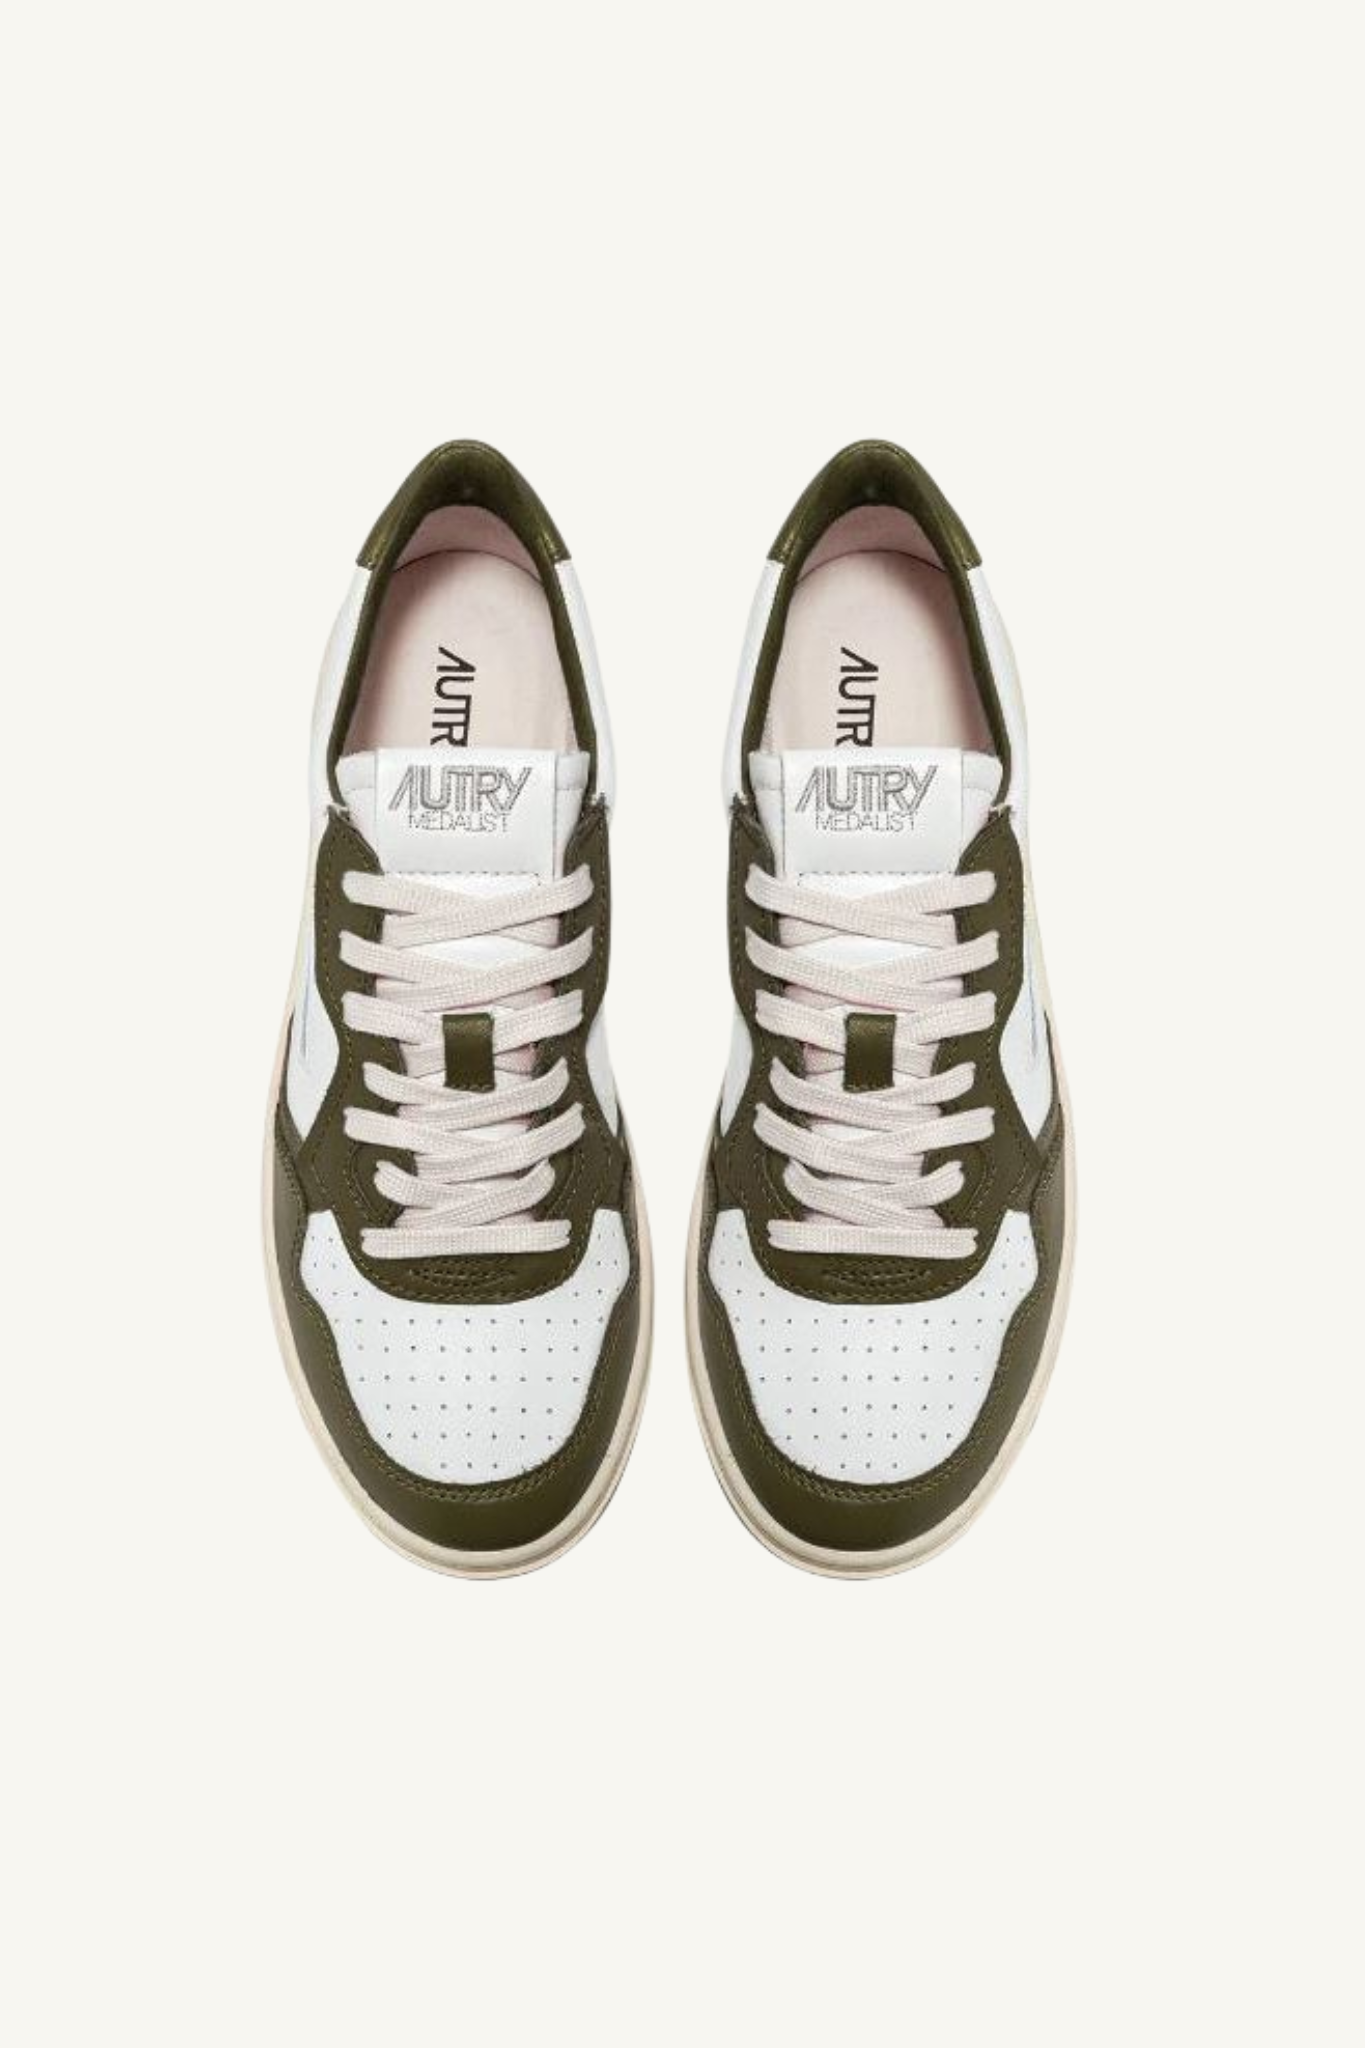 AULM-WB33 - MEDALIST LOW SNEAKERS IN TWO-TONE LEATHER COLOR WHITE AND OLIVA